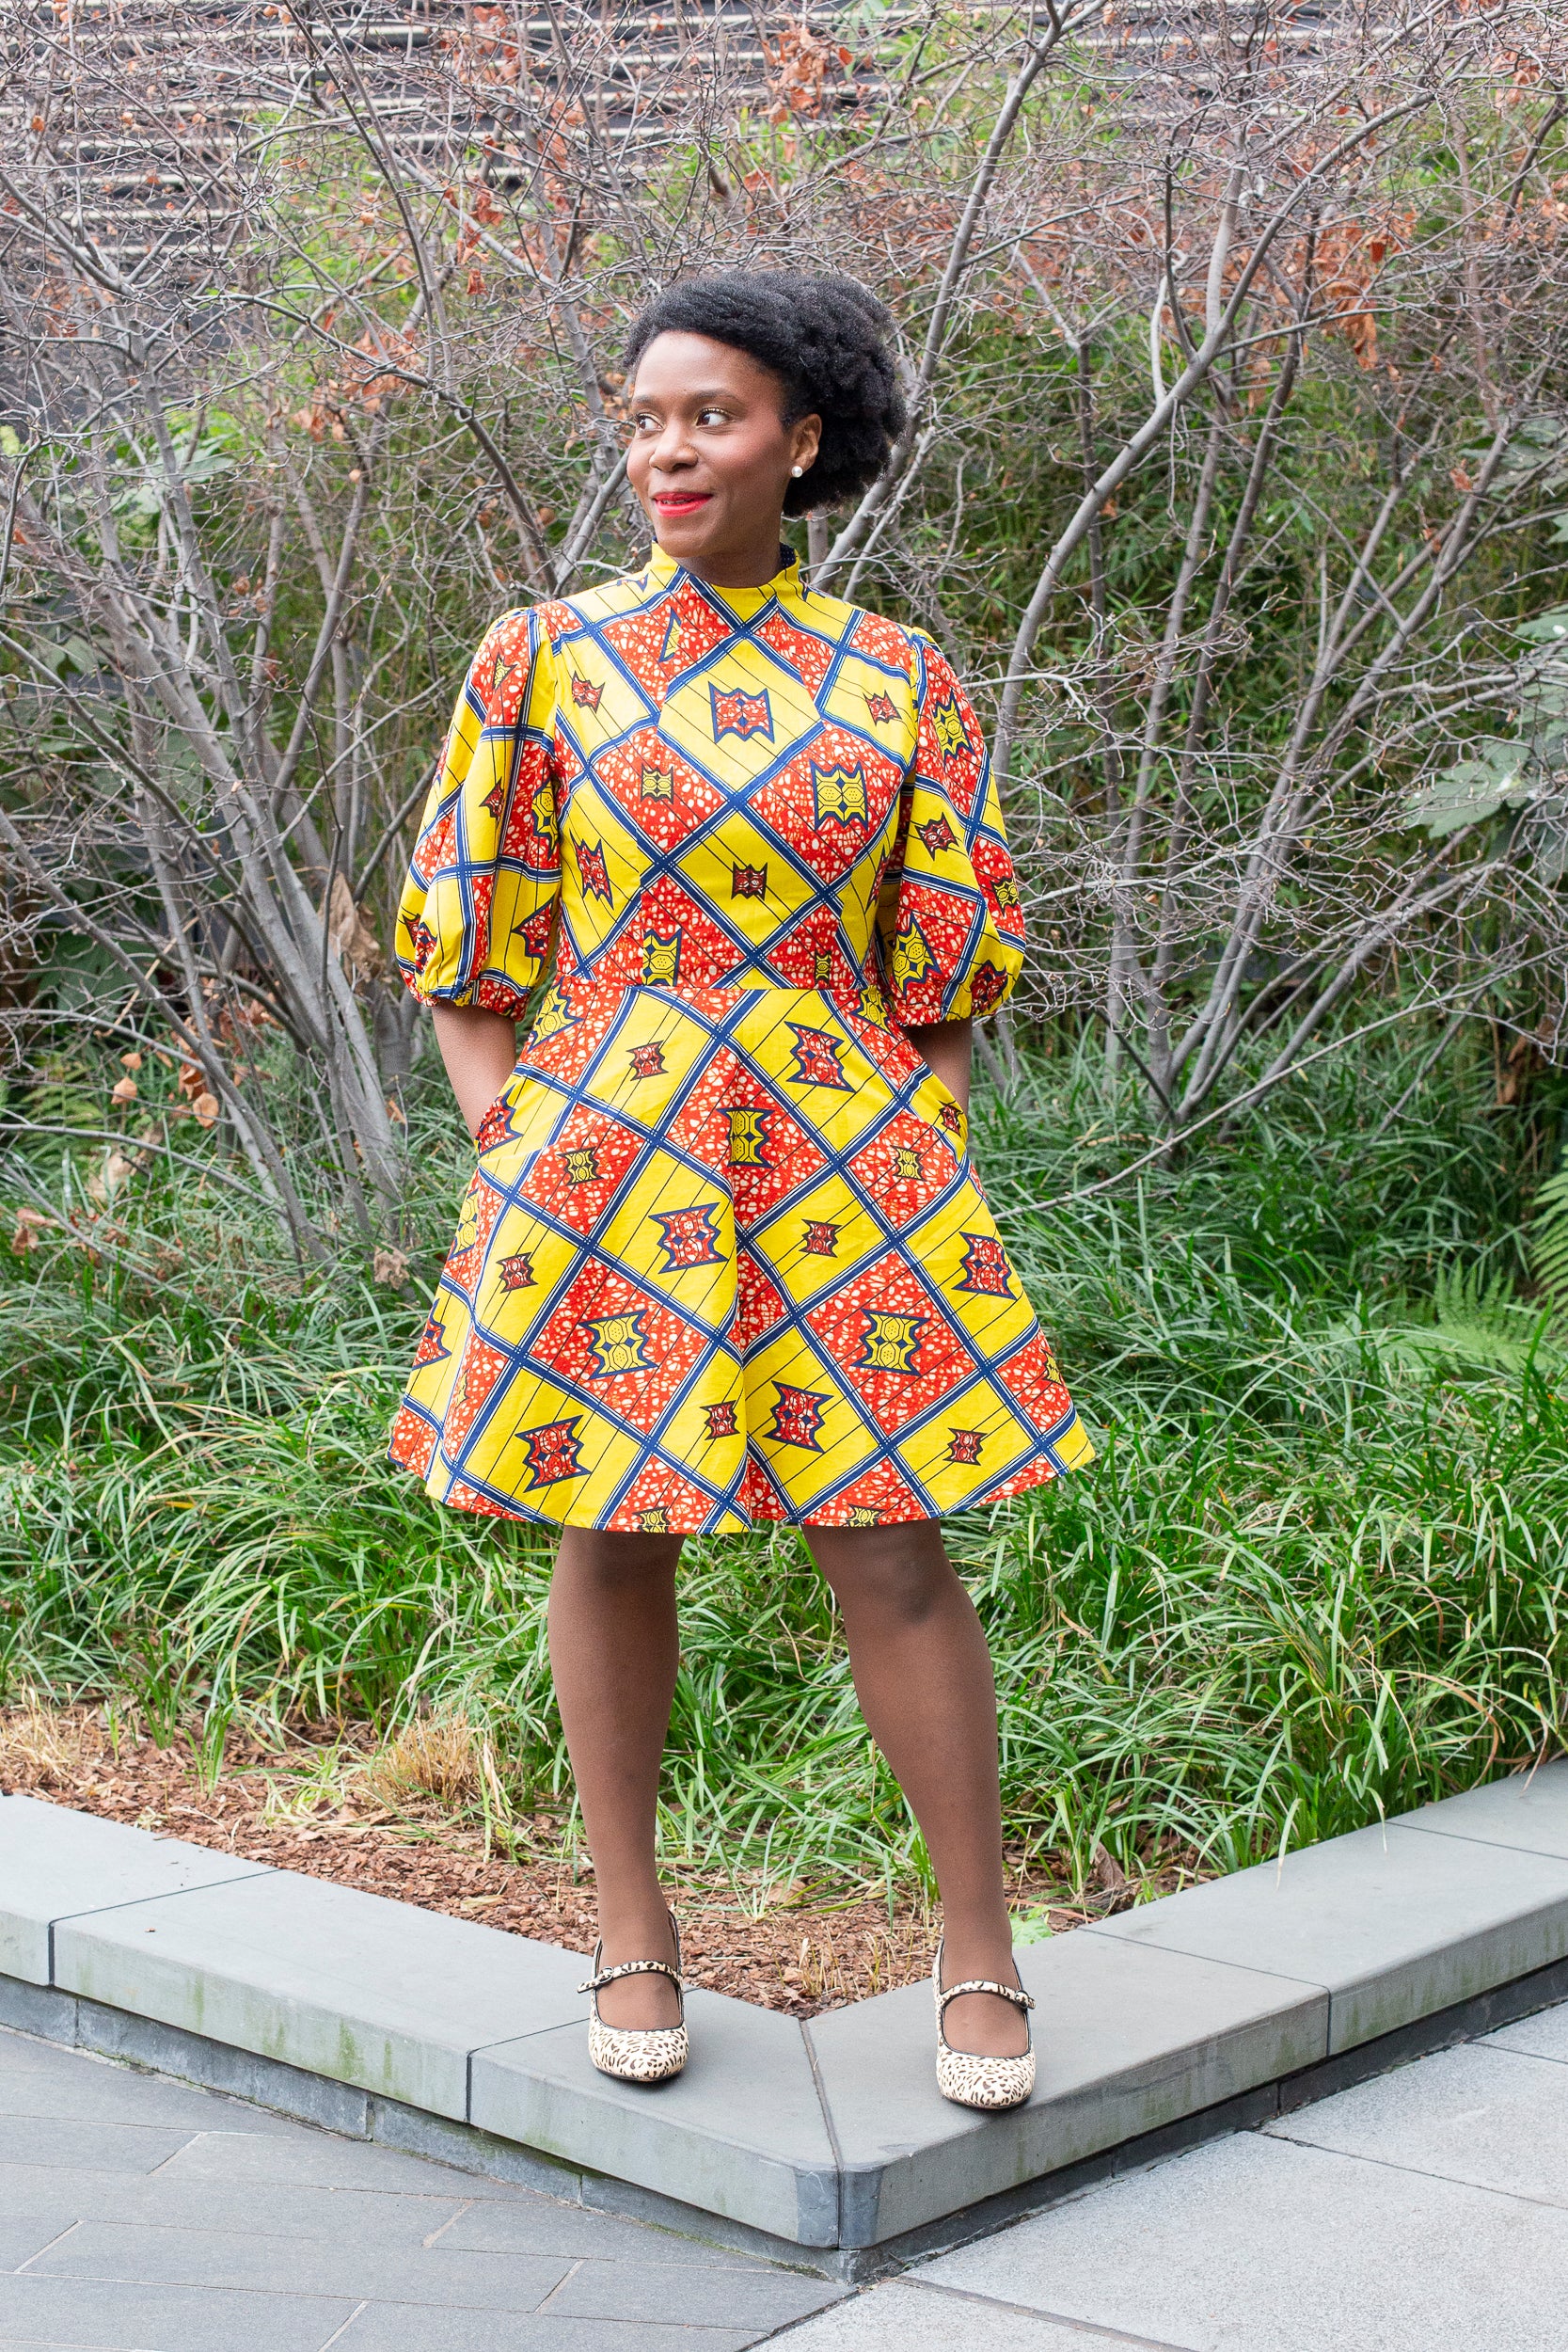 A person radiates happiness in a short yellow and red puff-sleeve dress, paired with white Mary Jane flats, standing in front of a garden setting.